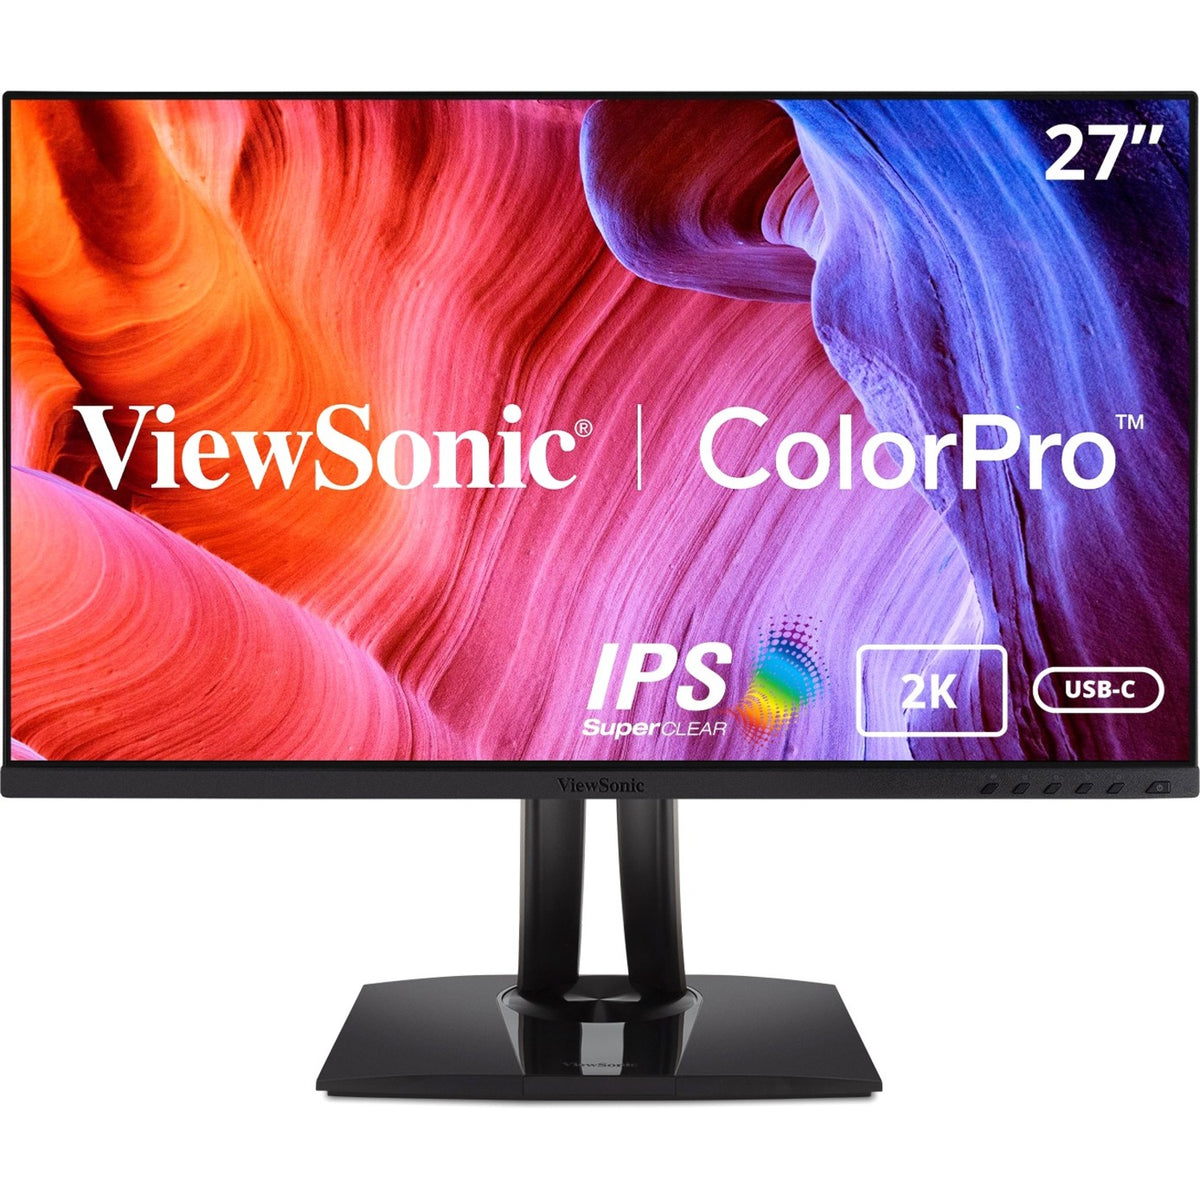 ViewSonic VP2756-2K 27 Inch Premium IPS 1440p Ergonomic Monitor with Ultra-Thin Bezels, Color Accuracy, Pantone Validated, HDMI, DisplayPort and USB C for Professional Home and Office - VP2756-2K